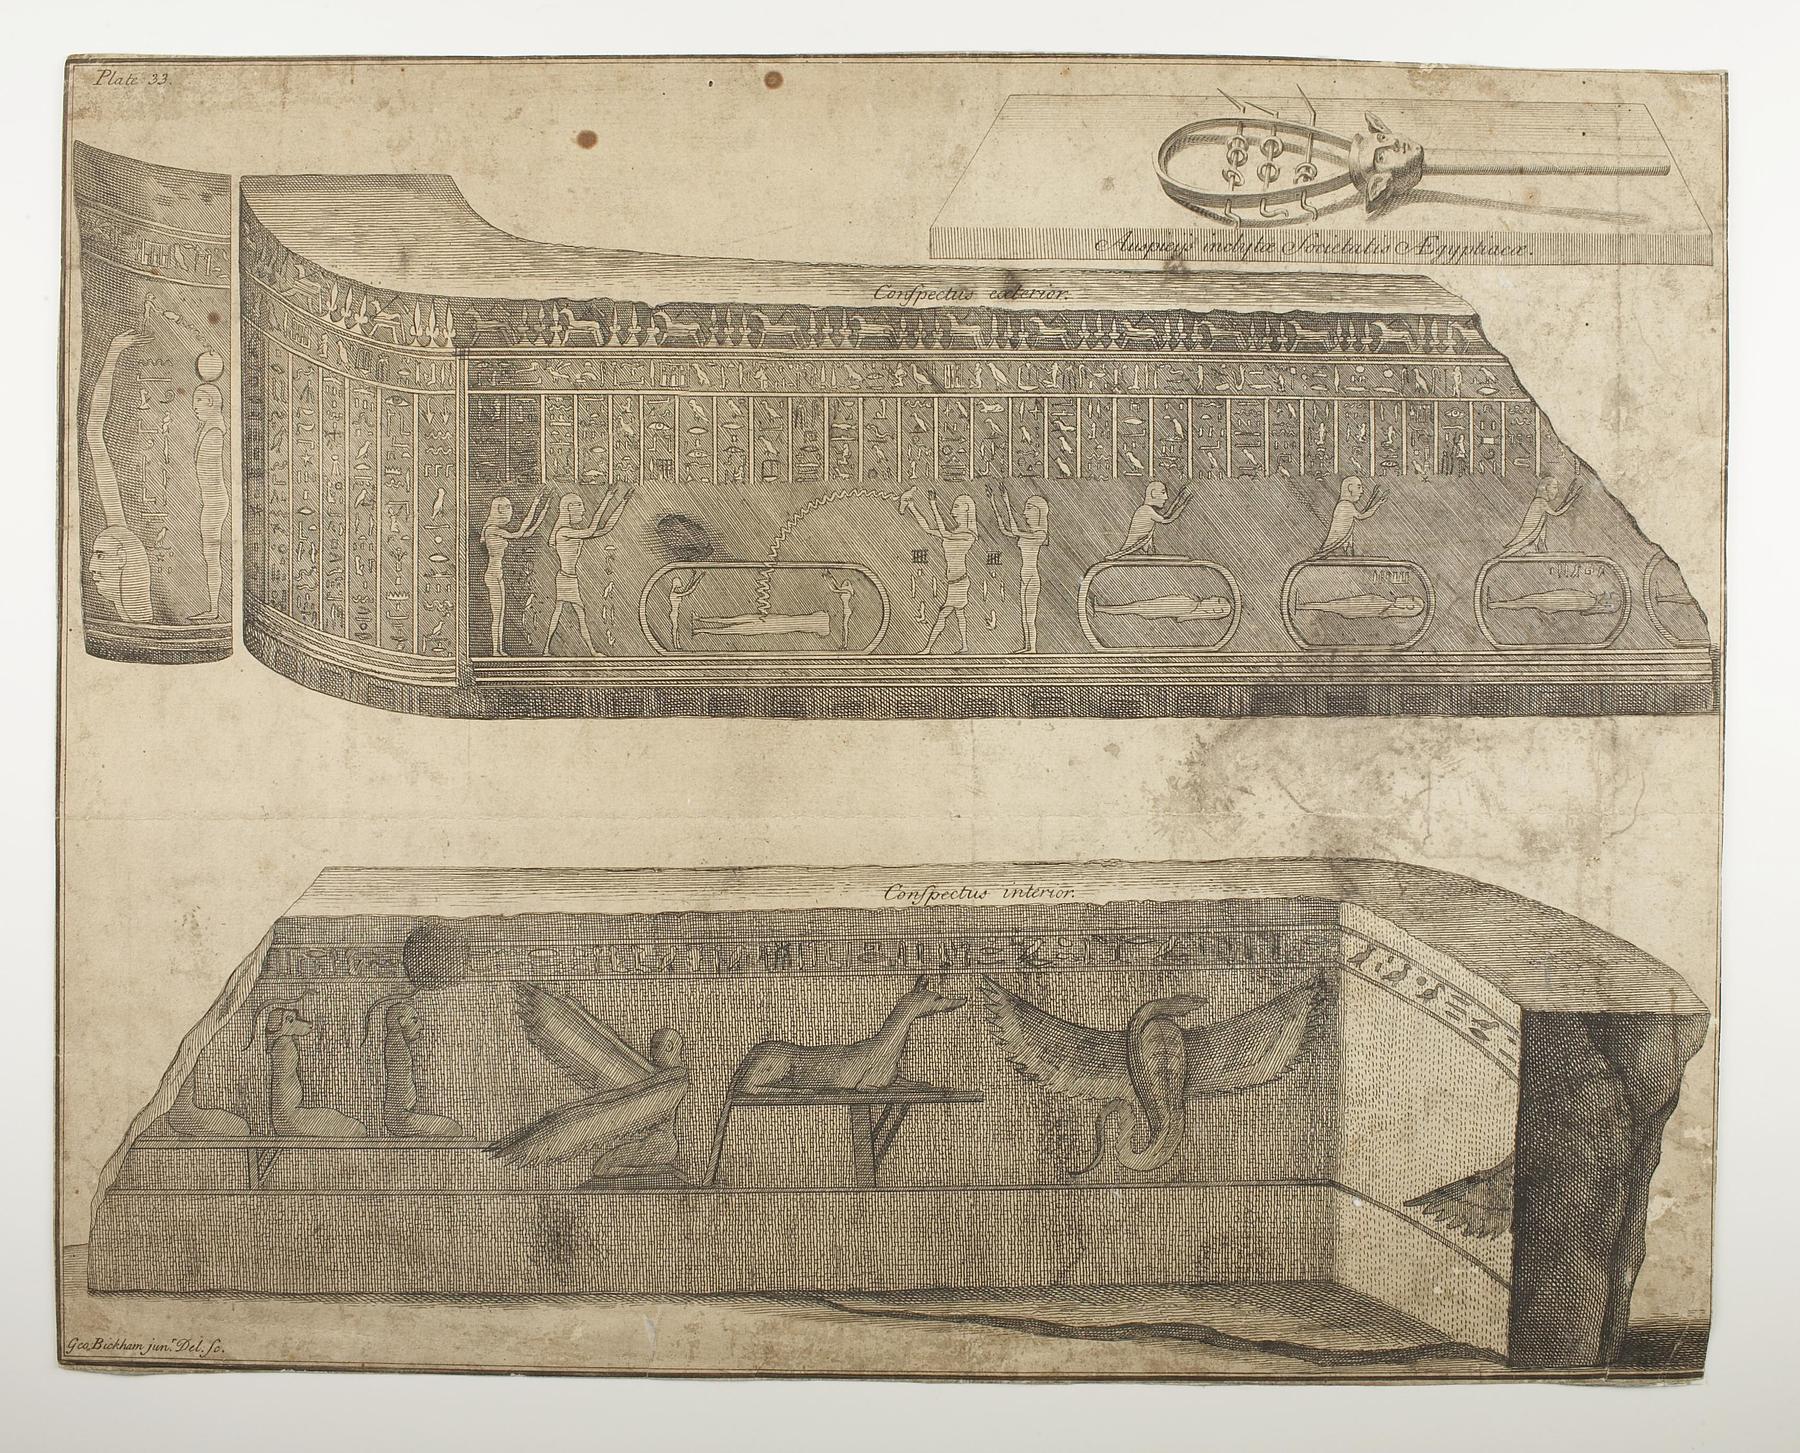 Inner-Coffin of Irtyru, Detail with Figures and Hieroglyphs, E1359